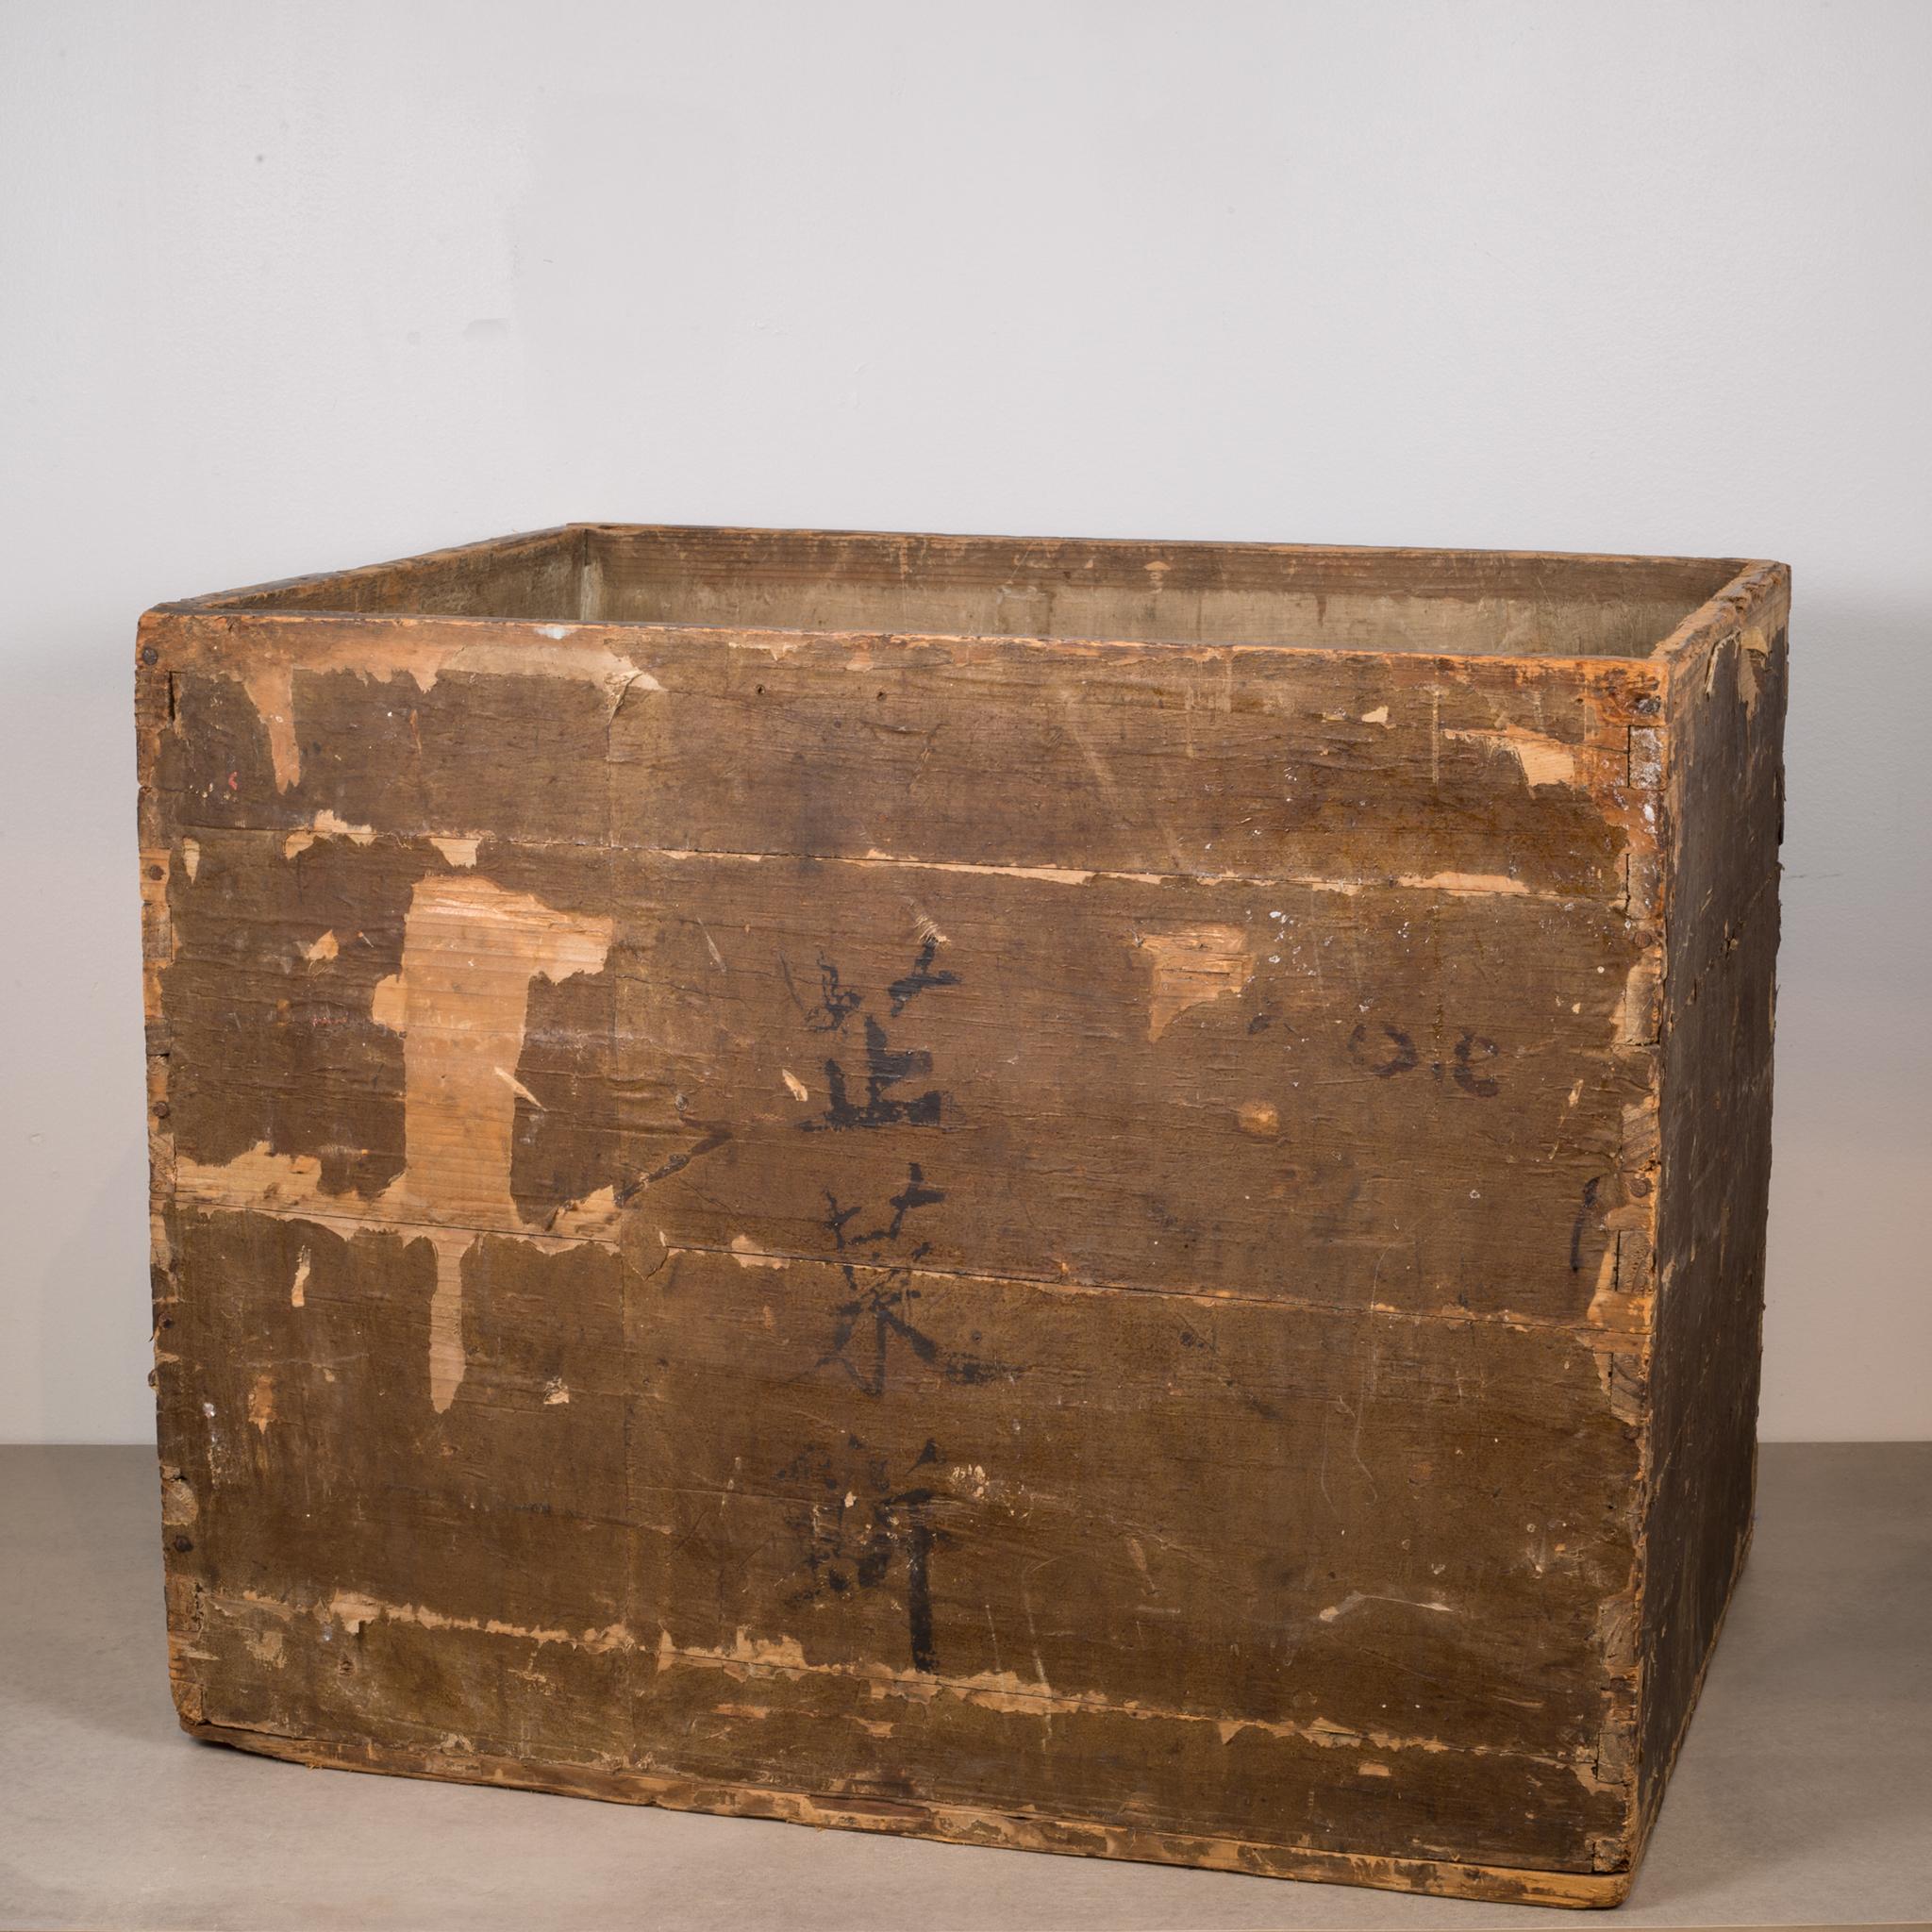 About

This is an original Chinese wooden box with dovetail joints. It says, 